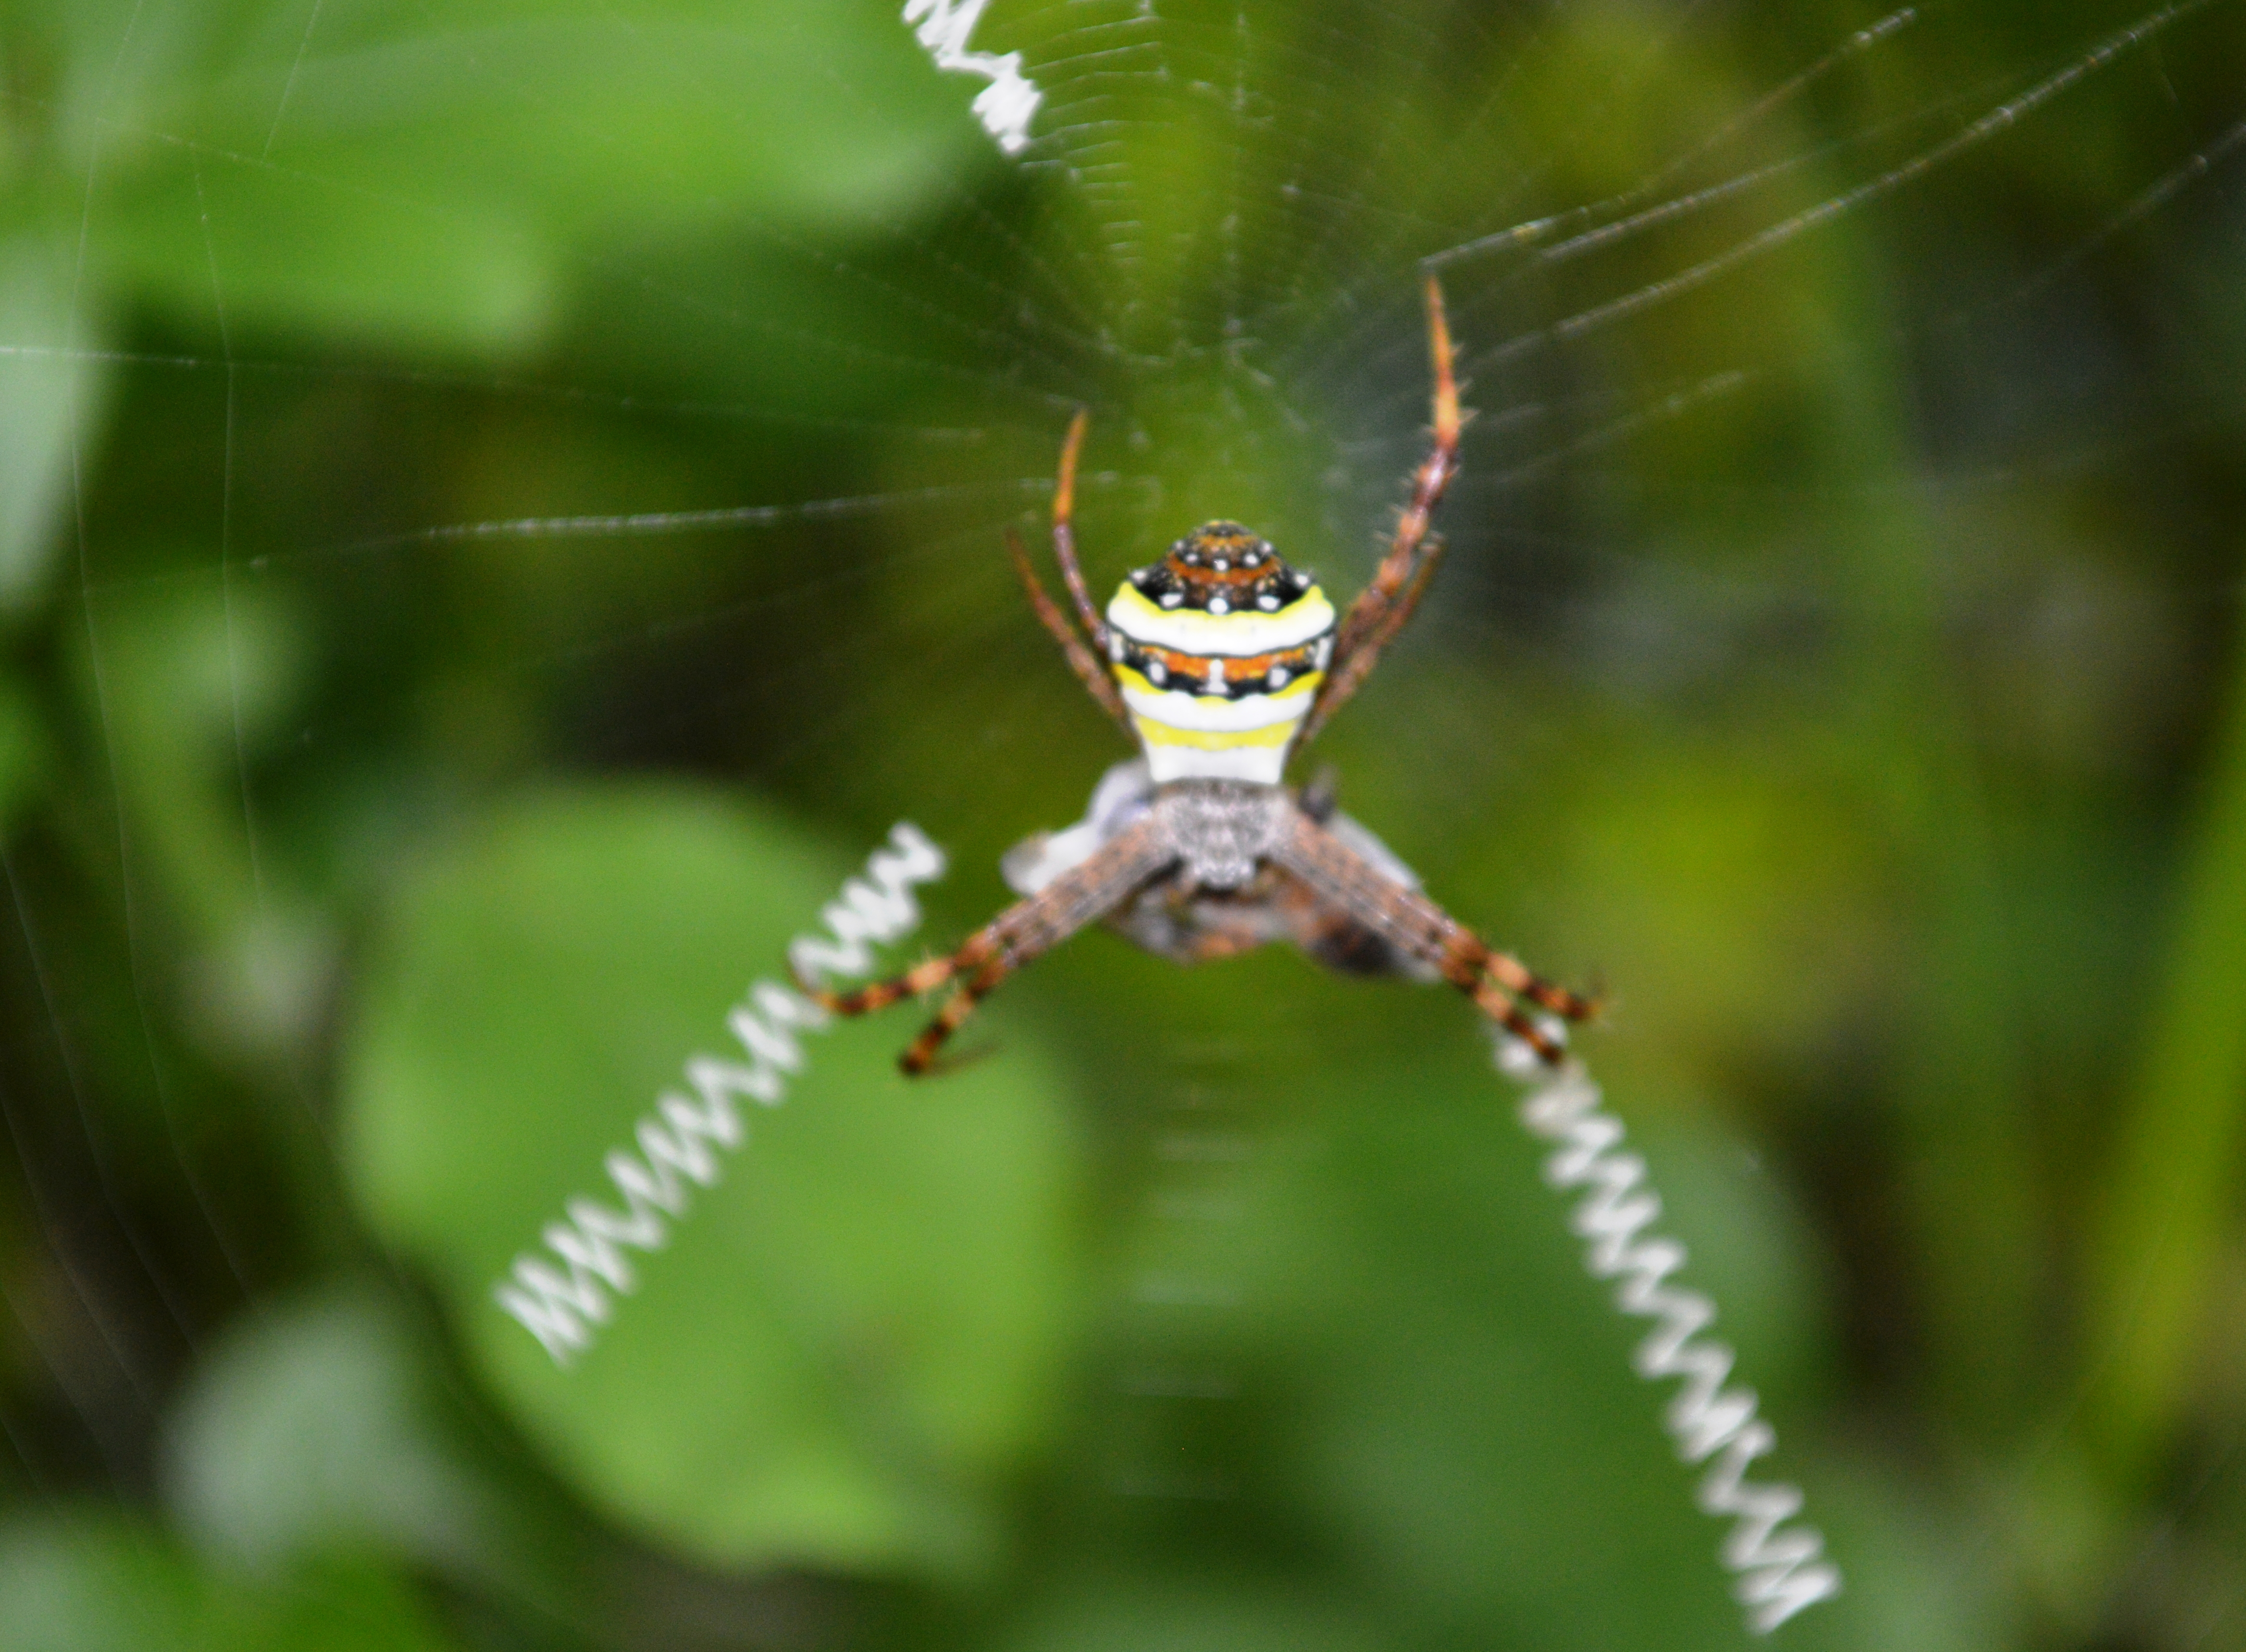 File:Indian spider.jpg - Wikimedia Commons